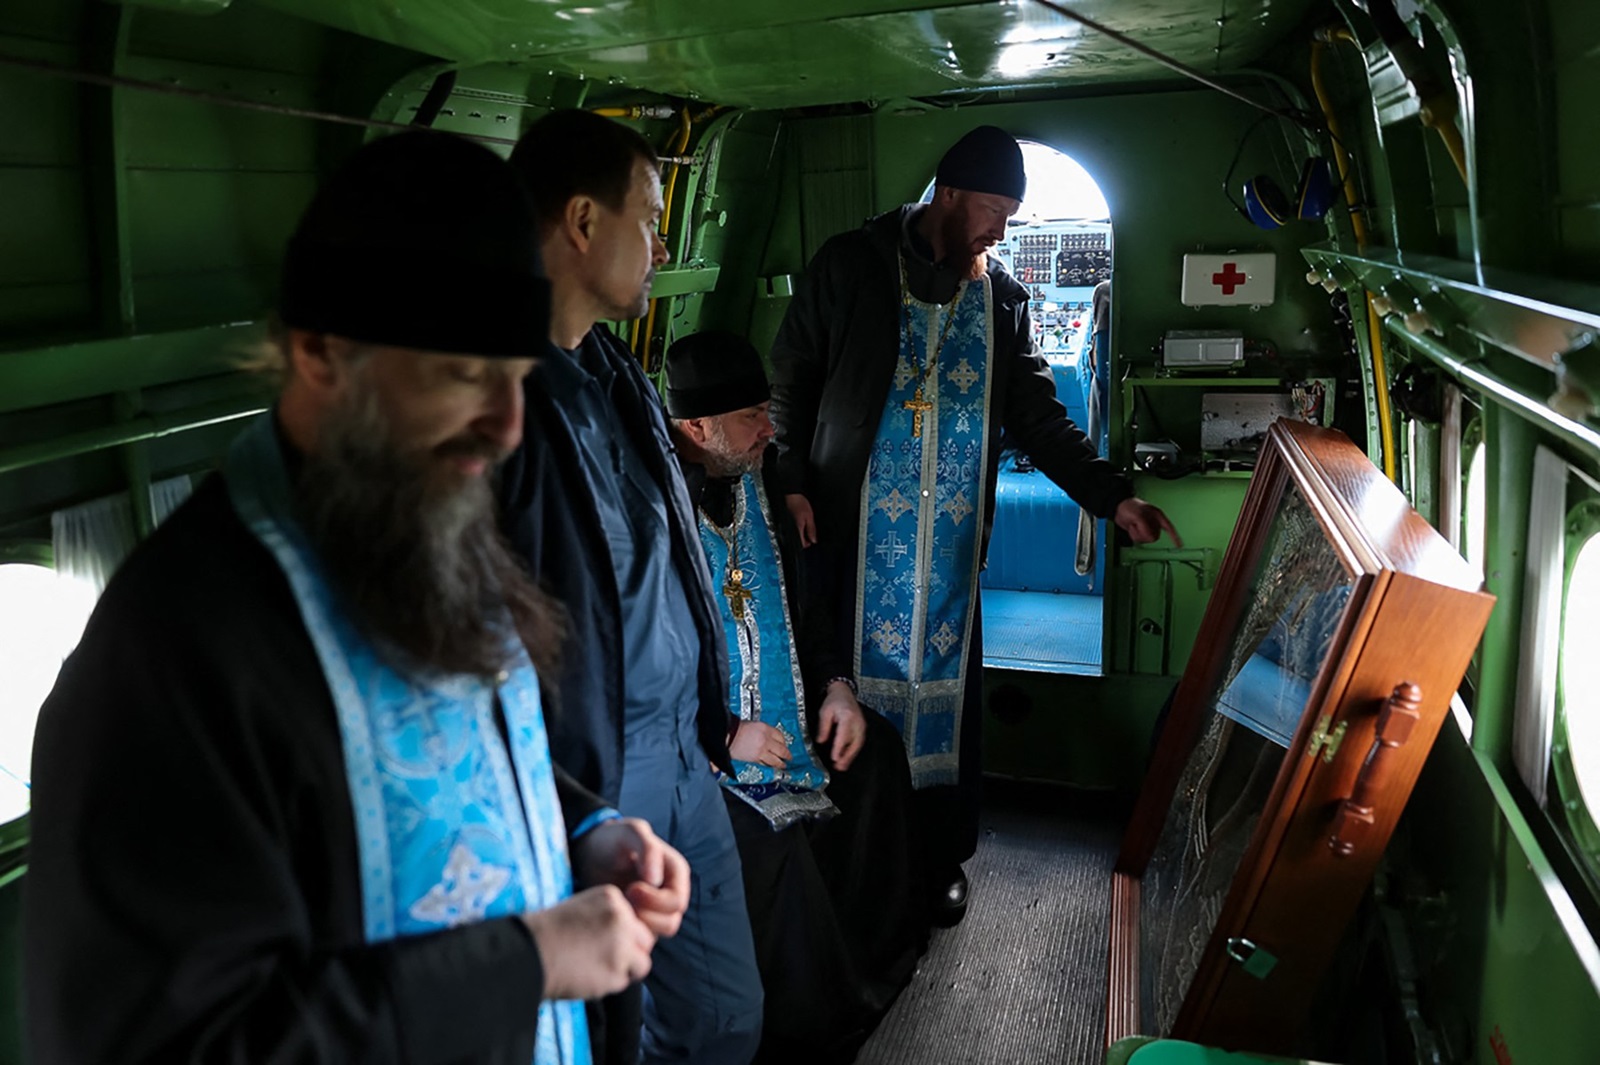 In this handout picture released by the Kurgan region branch of the Russian Orthodox Church on April 11, 2024 Orthodox priests conduct a service with a miraculous icon of the Mother of God aboard an Antonov An-2 plane during an aerial monitoring flight with emergencies specialists over the Kurgan region as part of anti-flood measures.,Image: 864219048, License: Rights-managed, Restrictions: RESTRICTED TO EDITORIAL USE - MANDATORY CREDIT "AFP PHOTO / Kurgan region branch of the Russian Orthodox Church" - NO MARKETING NO ADVERTISING CAMPAIGNS - DISTRIBUTED AS A SERVICE TO CLIENTS, ***
HANDOUT image or SOCIAL MEDIA IMAGE or FILMSTILL for EDITORIAL USE ONLY! * Please note: Fees charged by Profimedia are for the Profimedia's services only, and do not, nor are they intended to, convey to the user any ownership of Copyright or License in the material. Profimedia does not claim any ownership including but not limited to Copyright or License in the attached material. By publishing this material you (the user) expressly agree to indemnify and to hold Profimedia and its directors, shareholders and employees harmless from any loss, claims, damages, demands, expenses (including legal fees), or any causes of action or allegation against Profimedia arising out of or connected in any way with publication of the material. Profimedia does not claim any copyright or license in the attached materials. Any downloading fees charged by Profimedia are for Profimedia's services only. * Handling Fee Only 
***, Model Release: no, Credit line: Handout / AFP / Profimedia